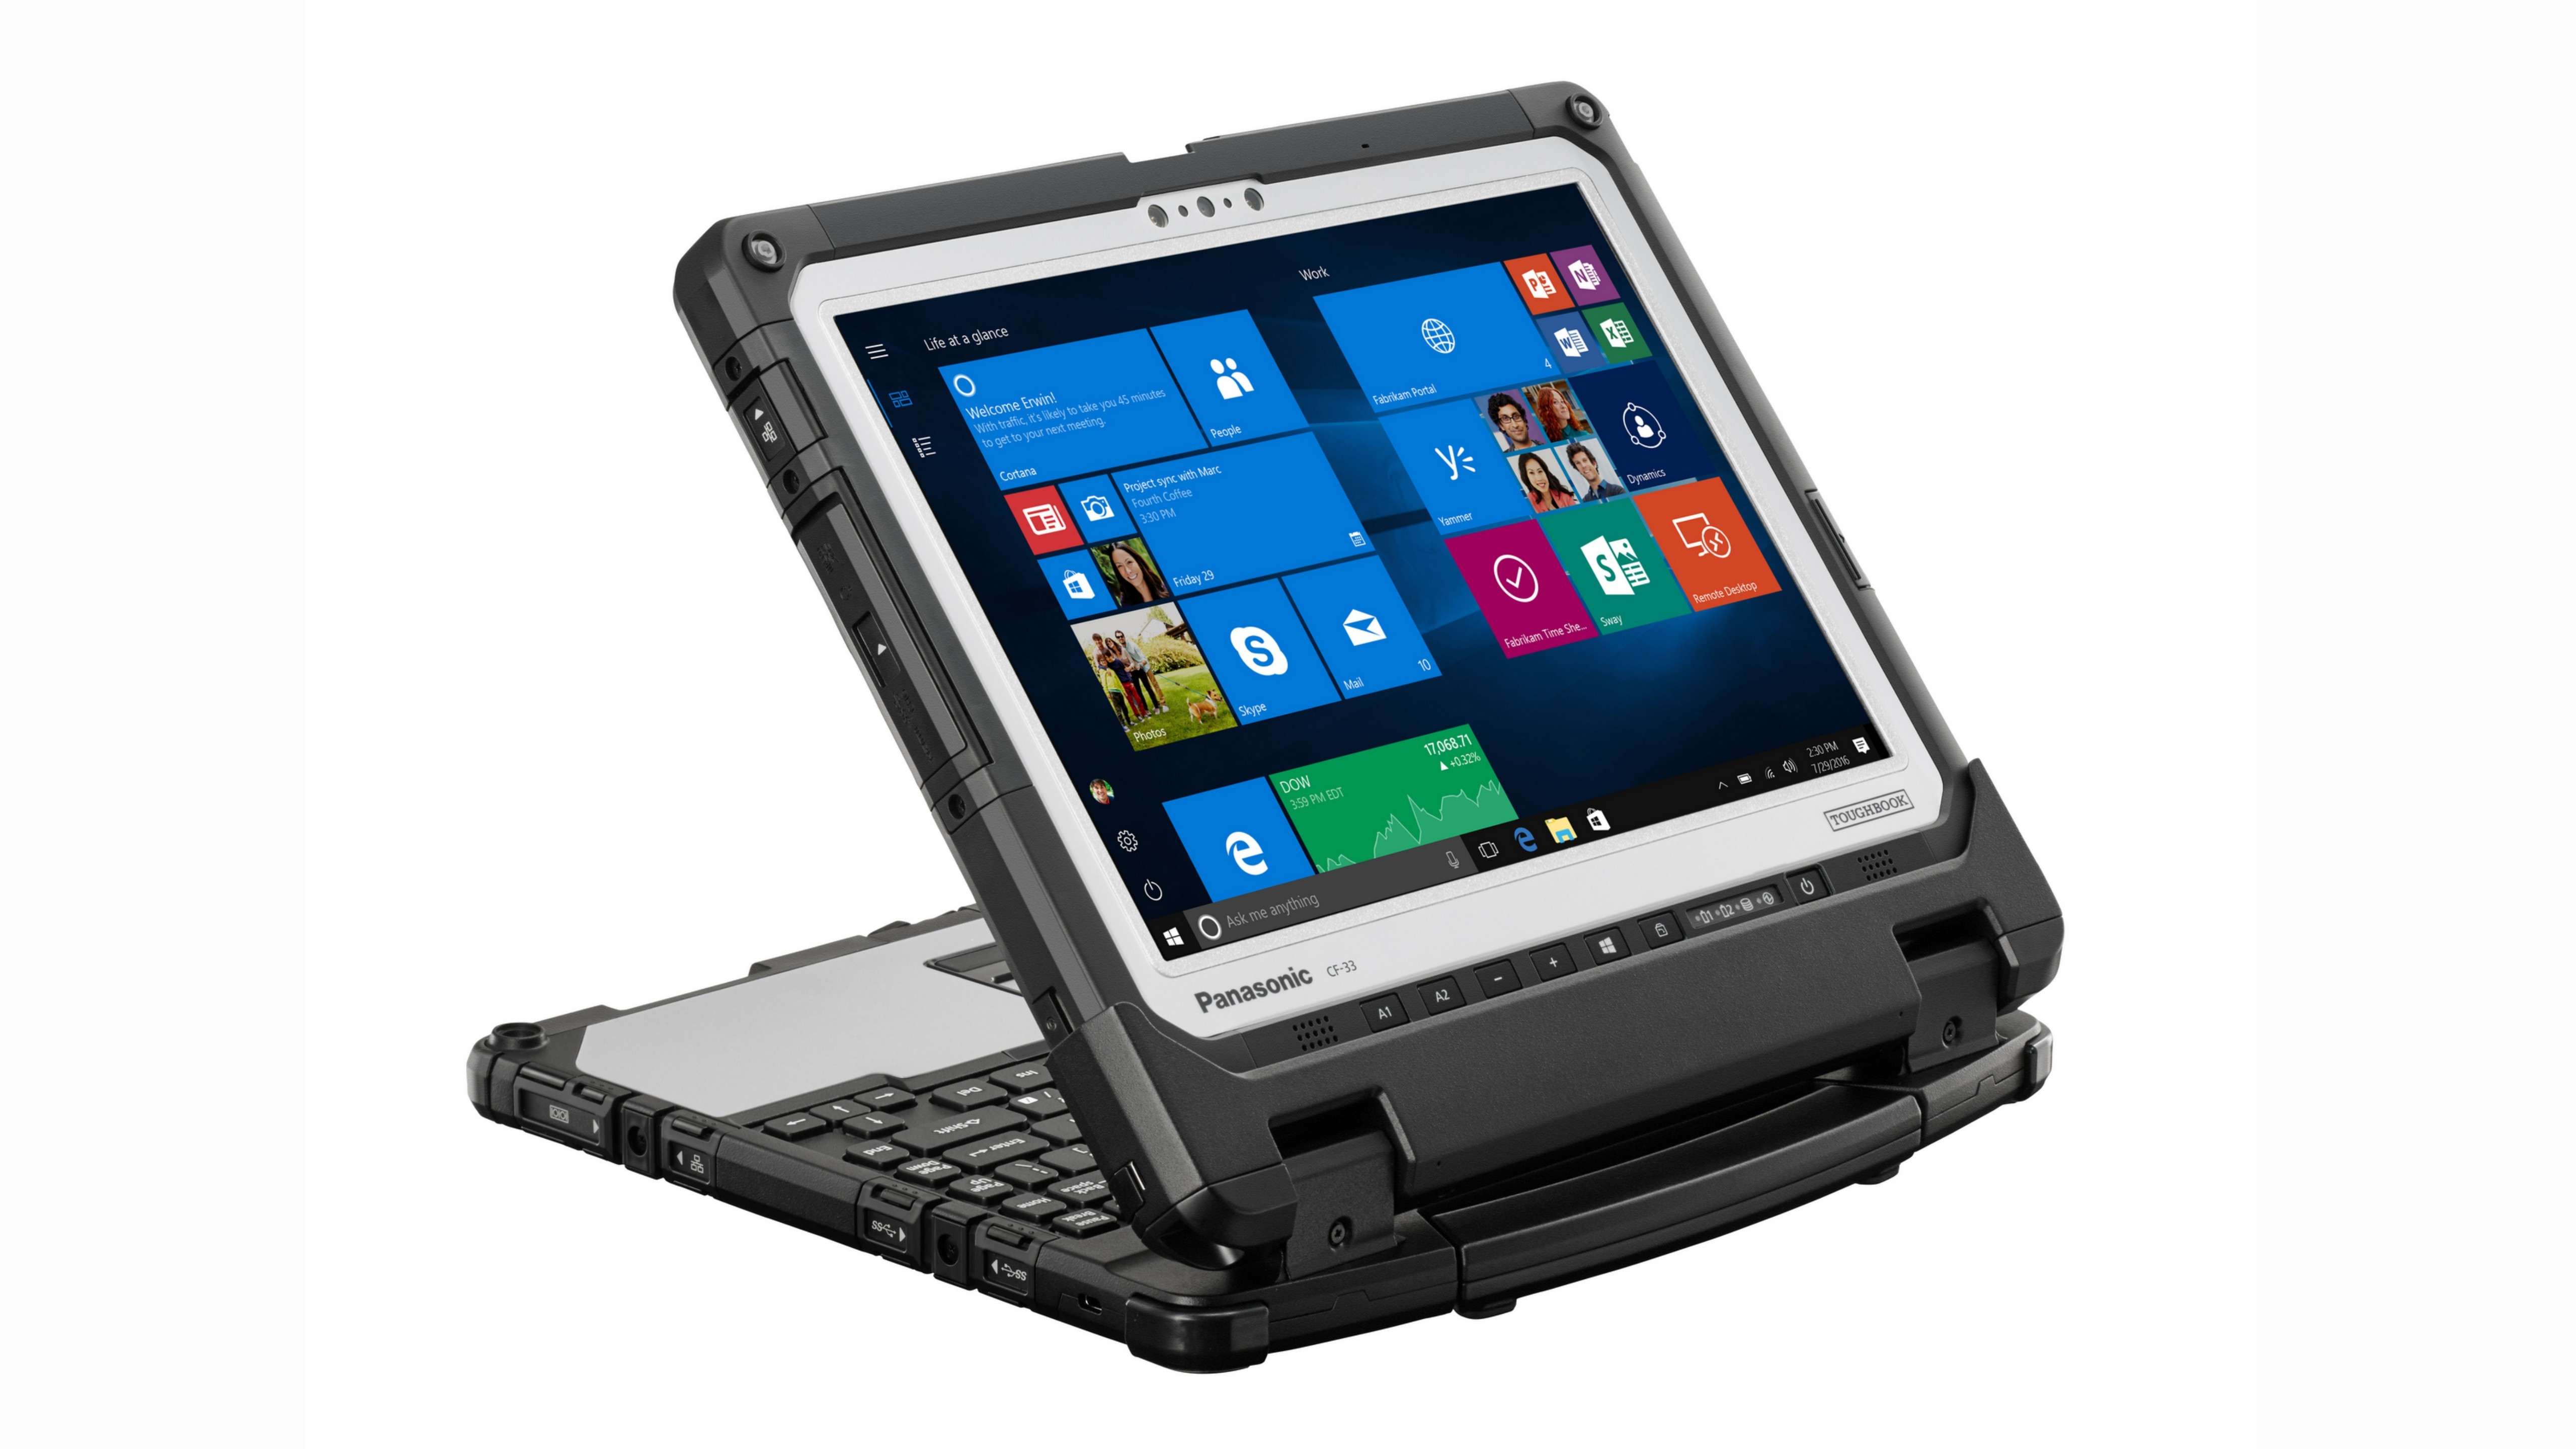 Panasonic Toughbook 33 2-in-1: Panasonic Toughbook 33 2-in-1 in attached flip mode